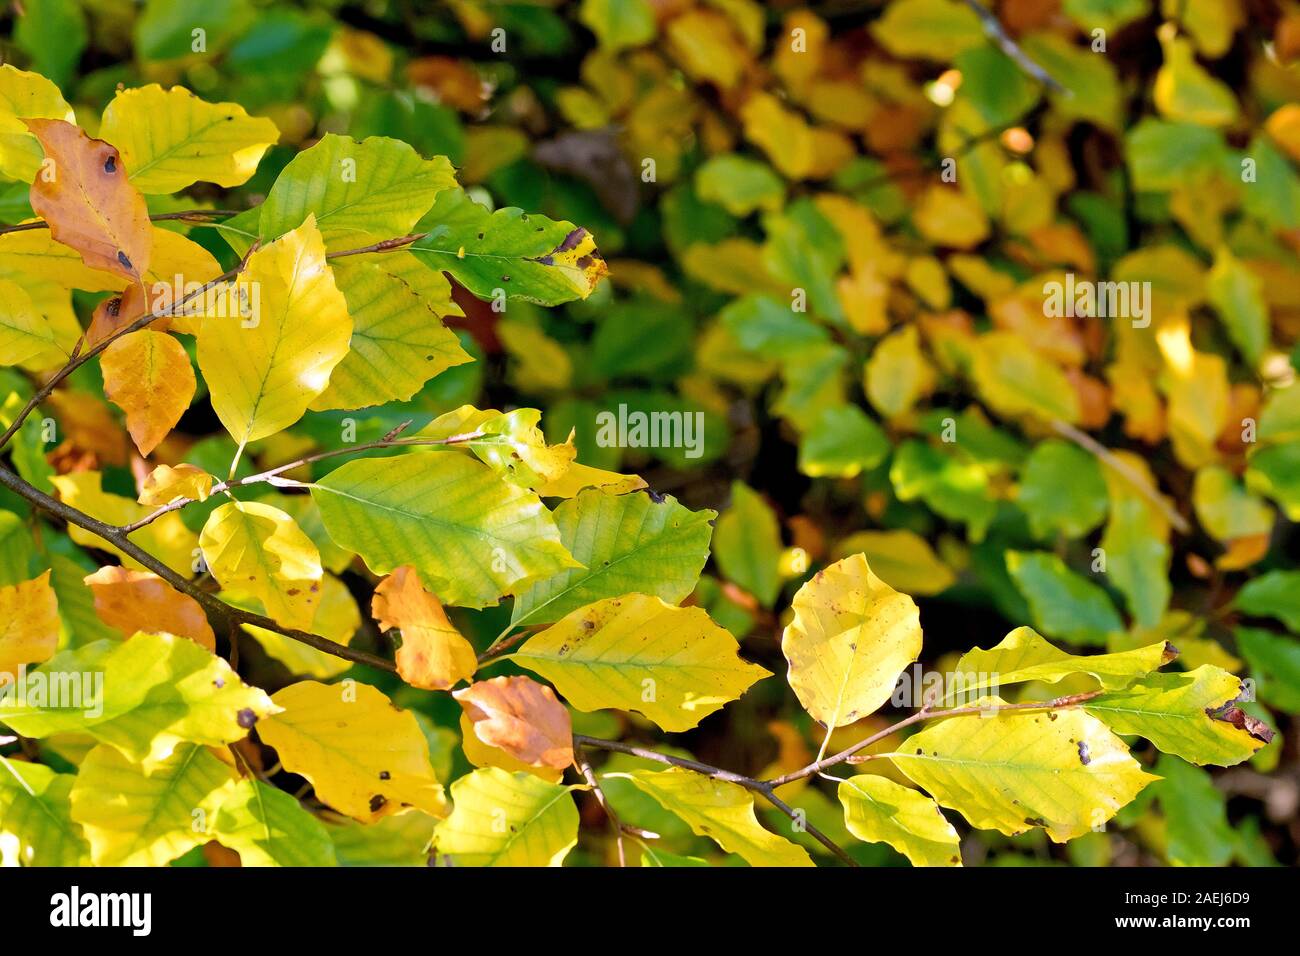 Autumn Beech leaves (fagus sylvatica), as they change colour from green, through yellow, to brown. Stock Photo